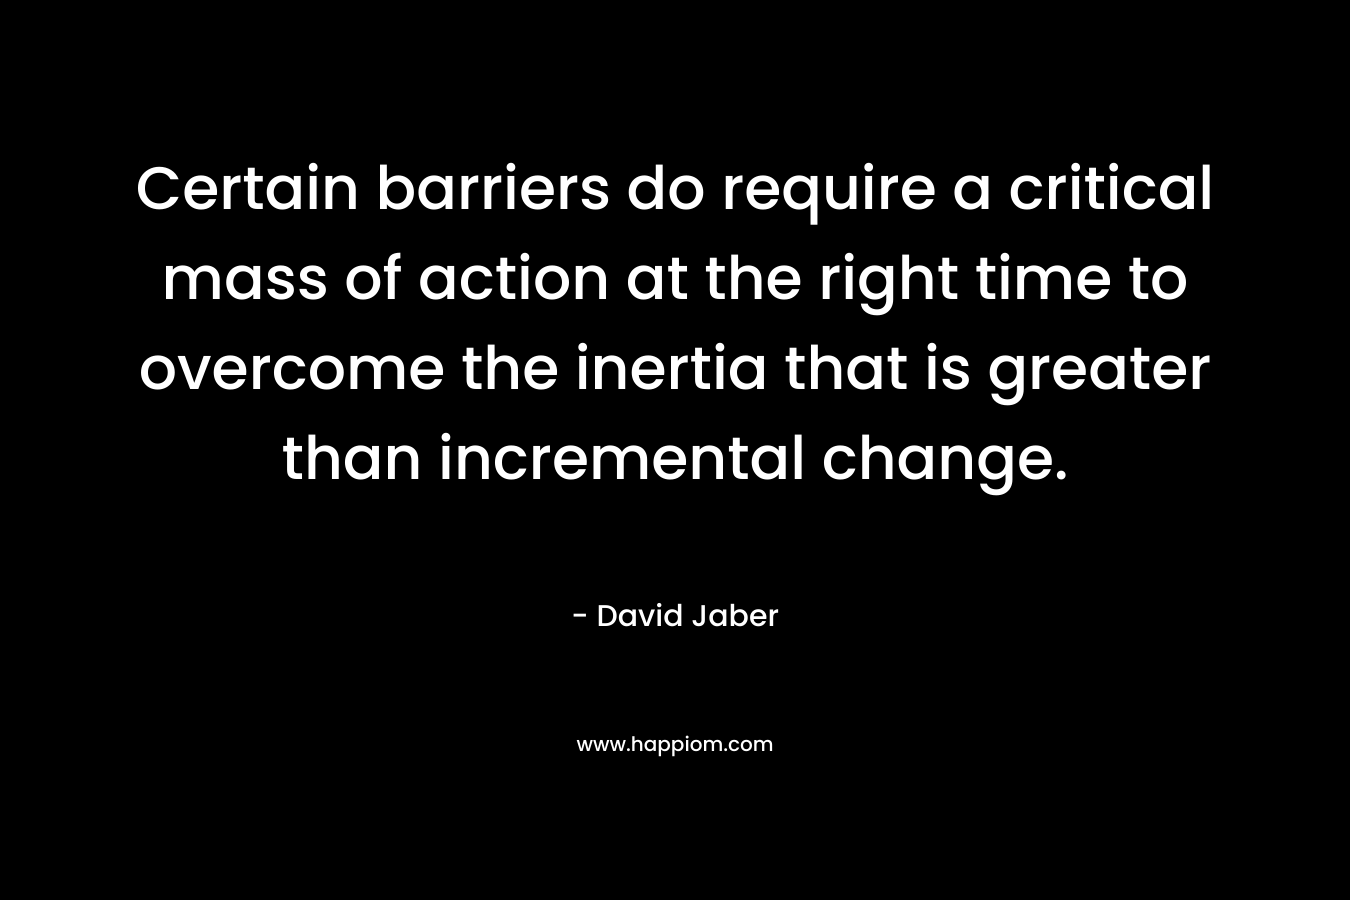 Certain barriers do require a critical mass of action at the right time to overcome the inertia that is greater than incremental change.